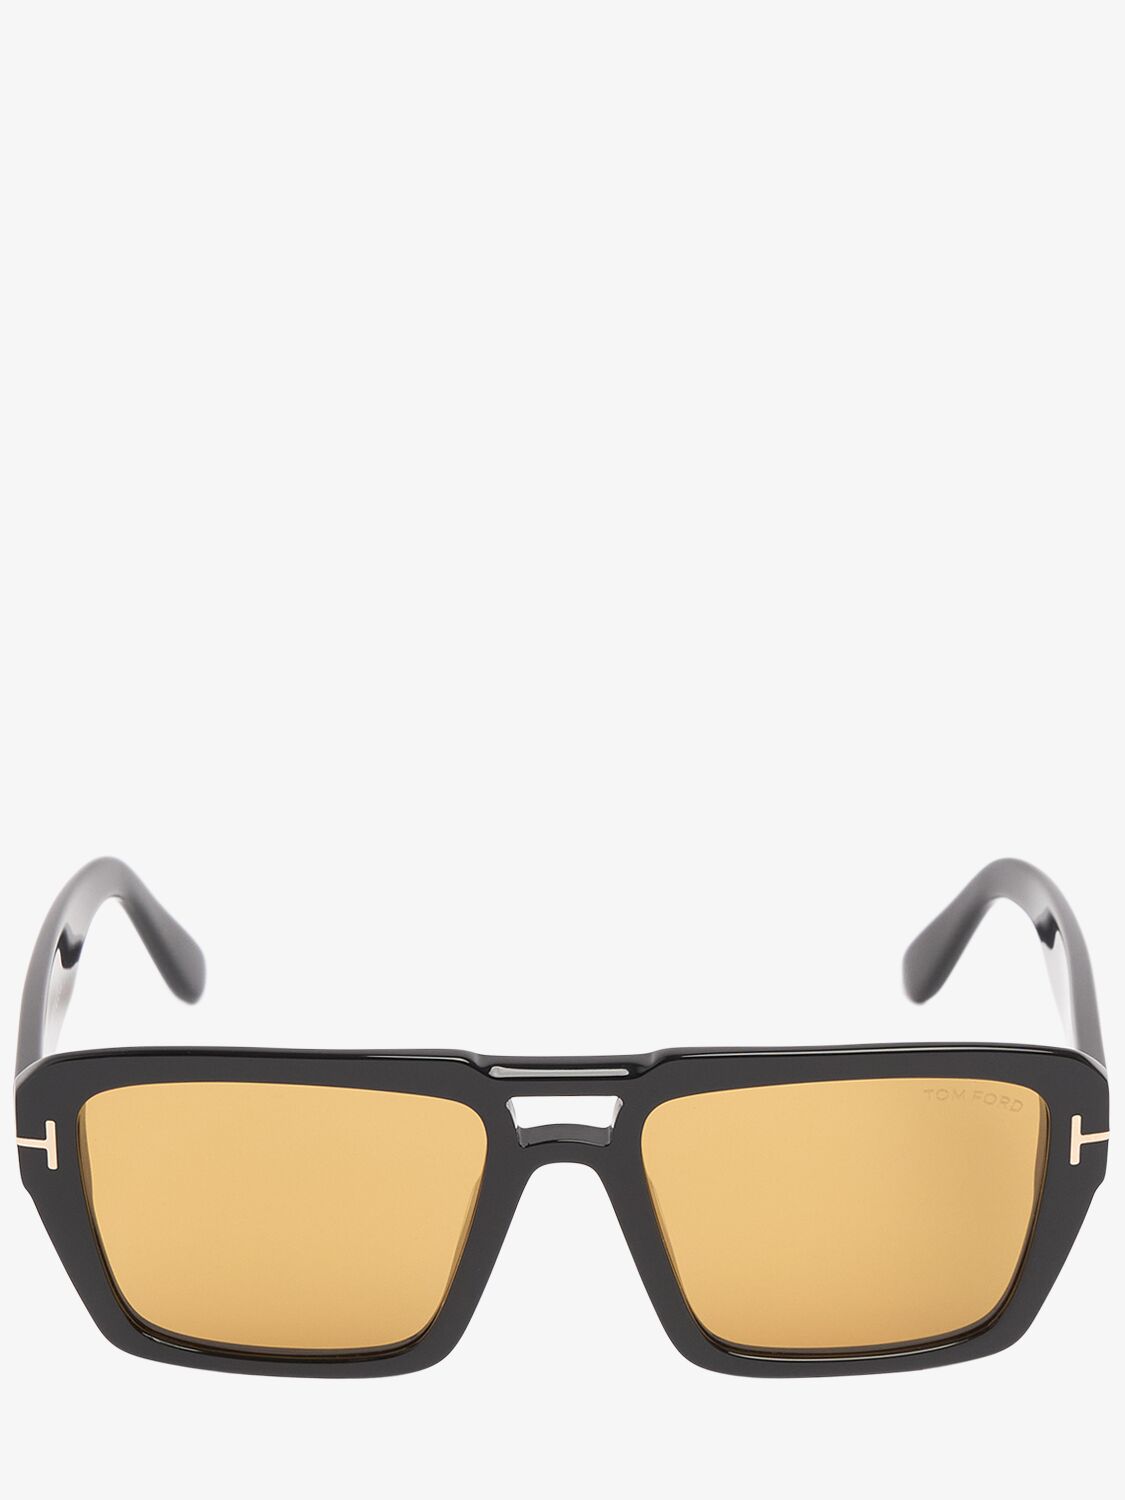 Tom Ford Redford Squared Sunglasses In Black/brown